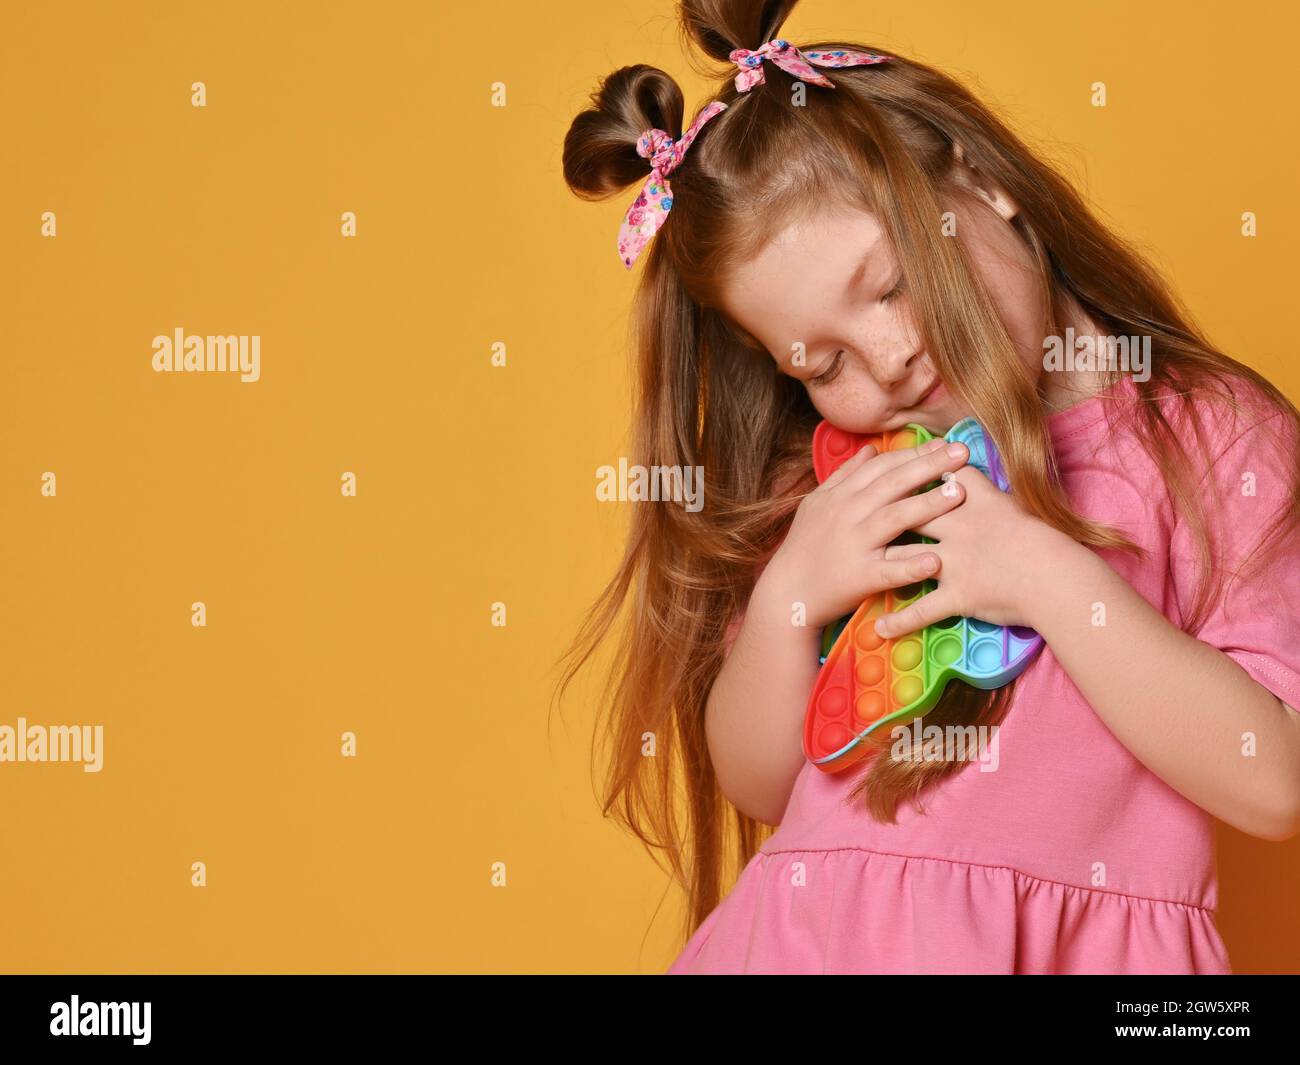 Cute red-haired kid girl in pink shirt hugs new sensory rainbow color butterfly shape toys - pop it Stock Photo